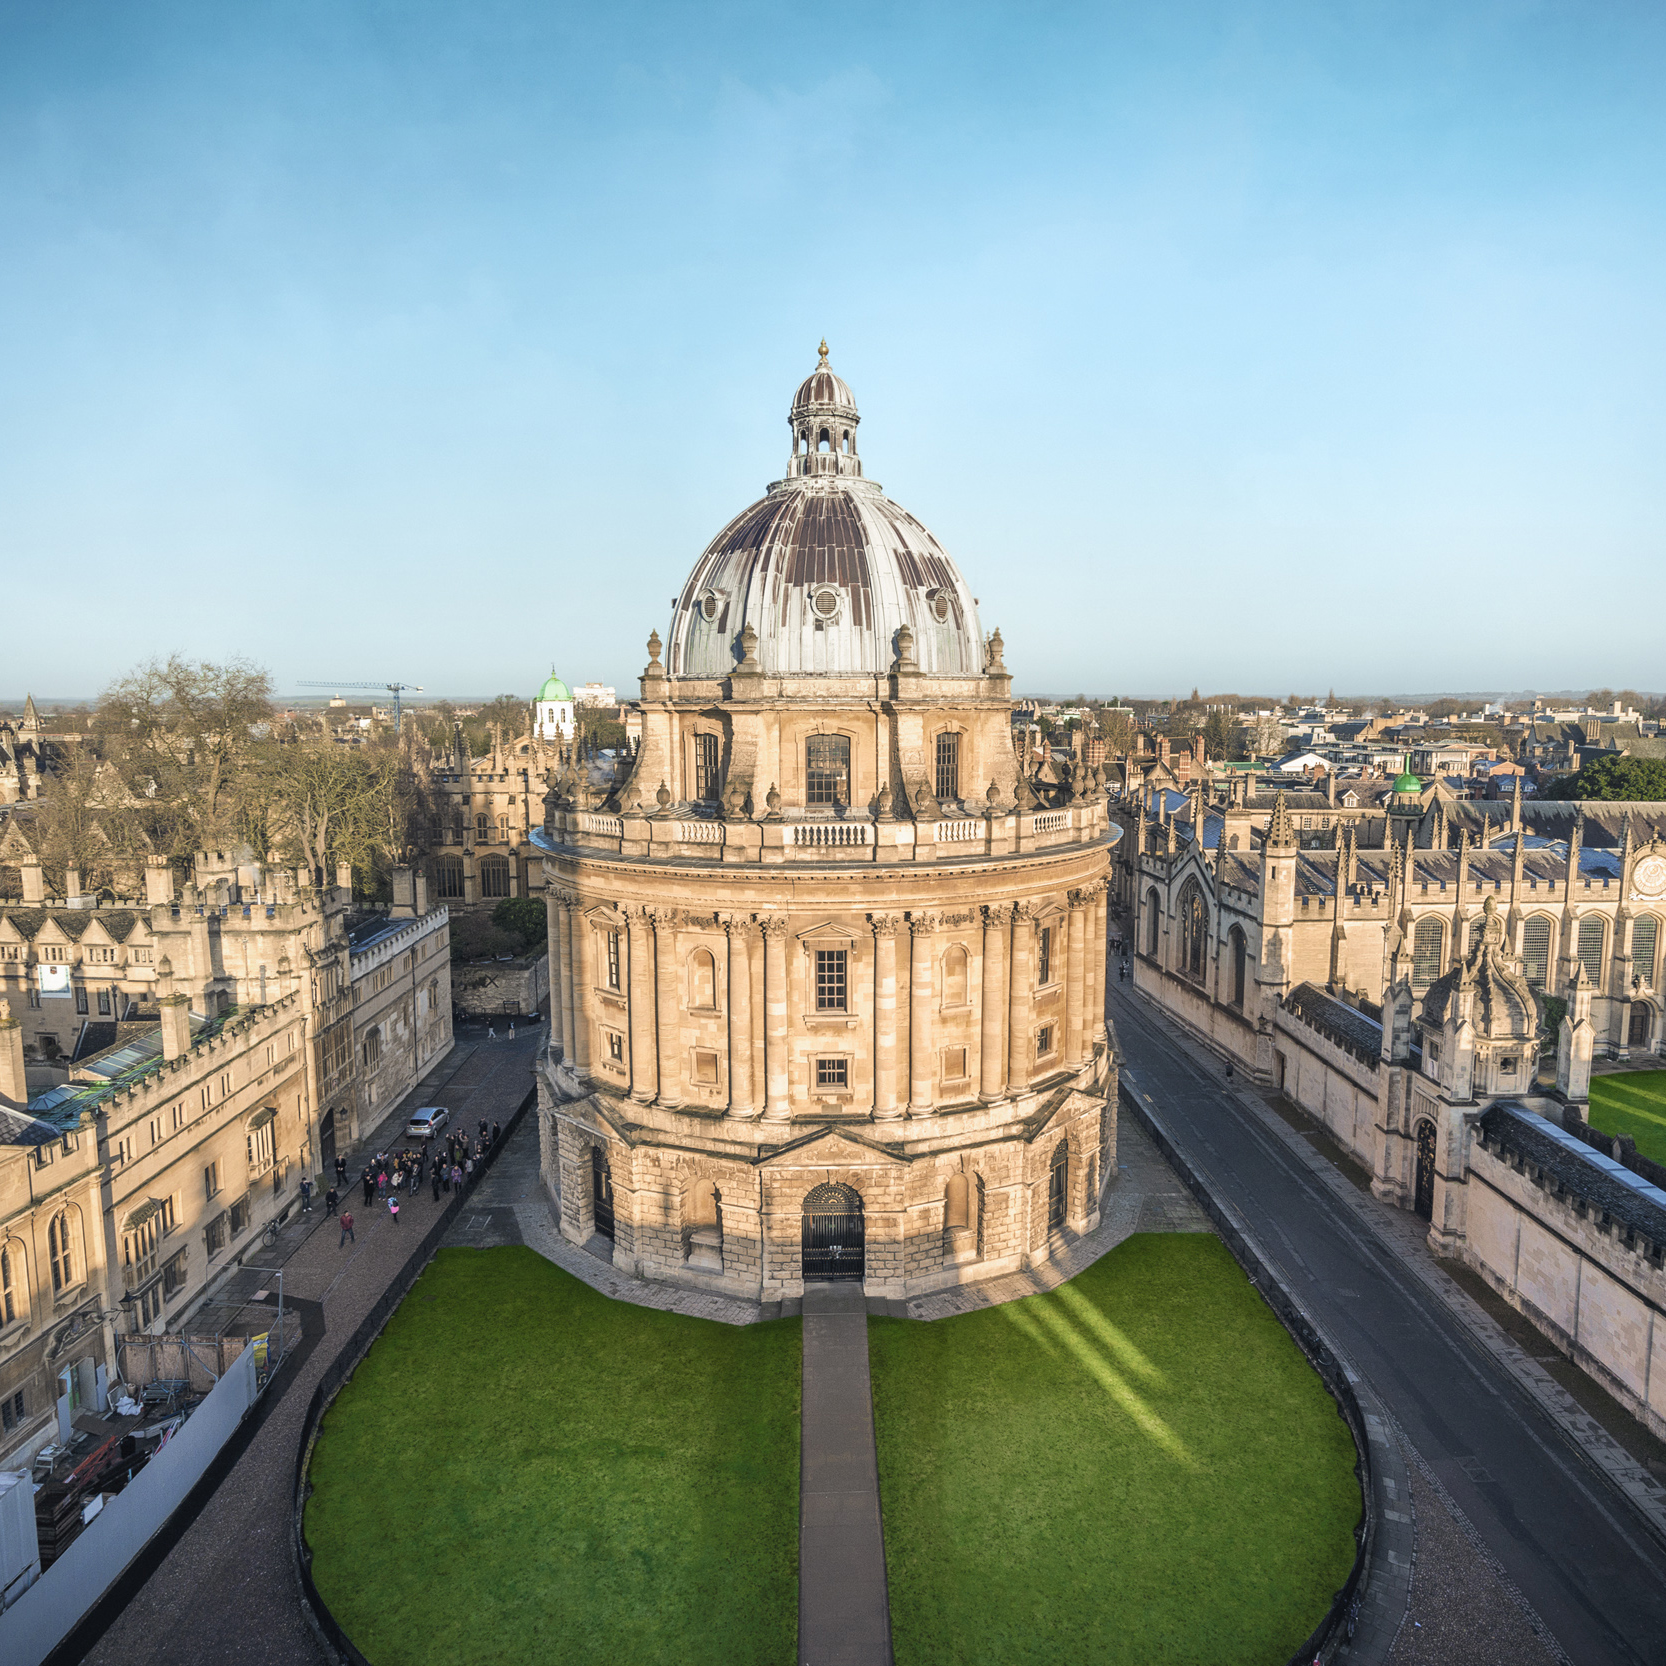 The image shows the Radcliffe Camera in Oxford.